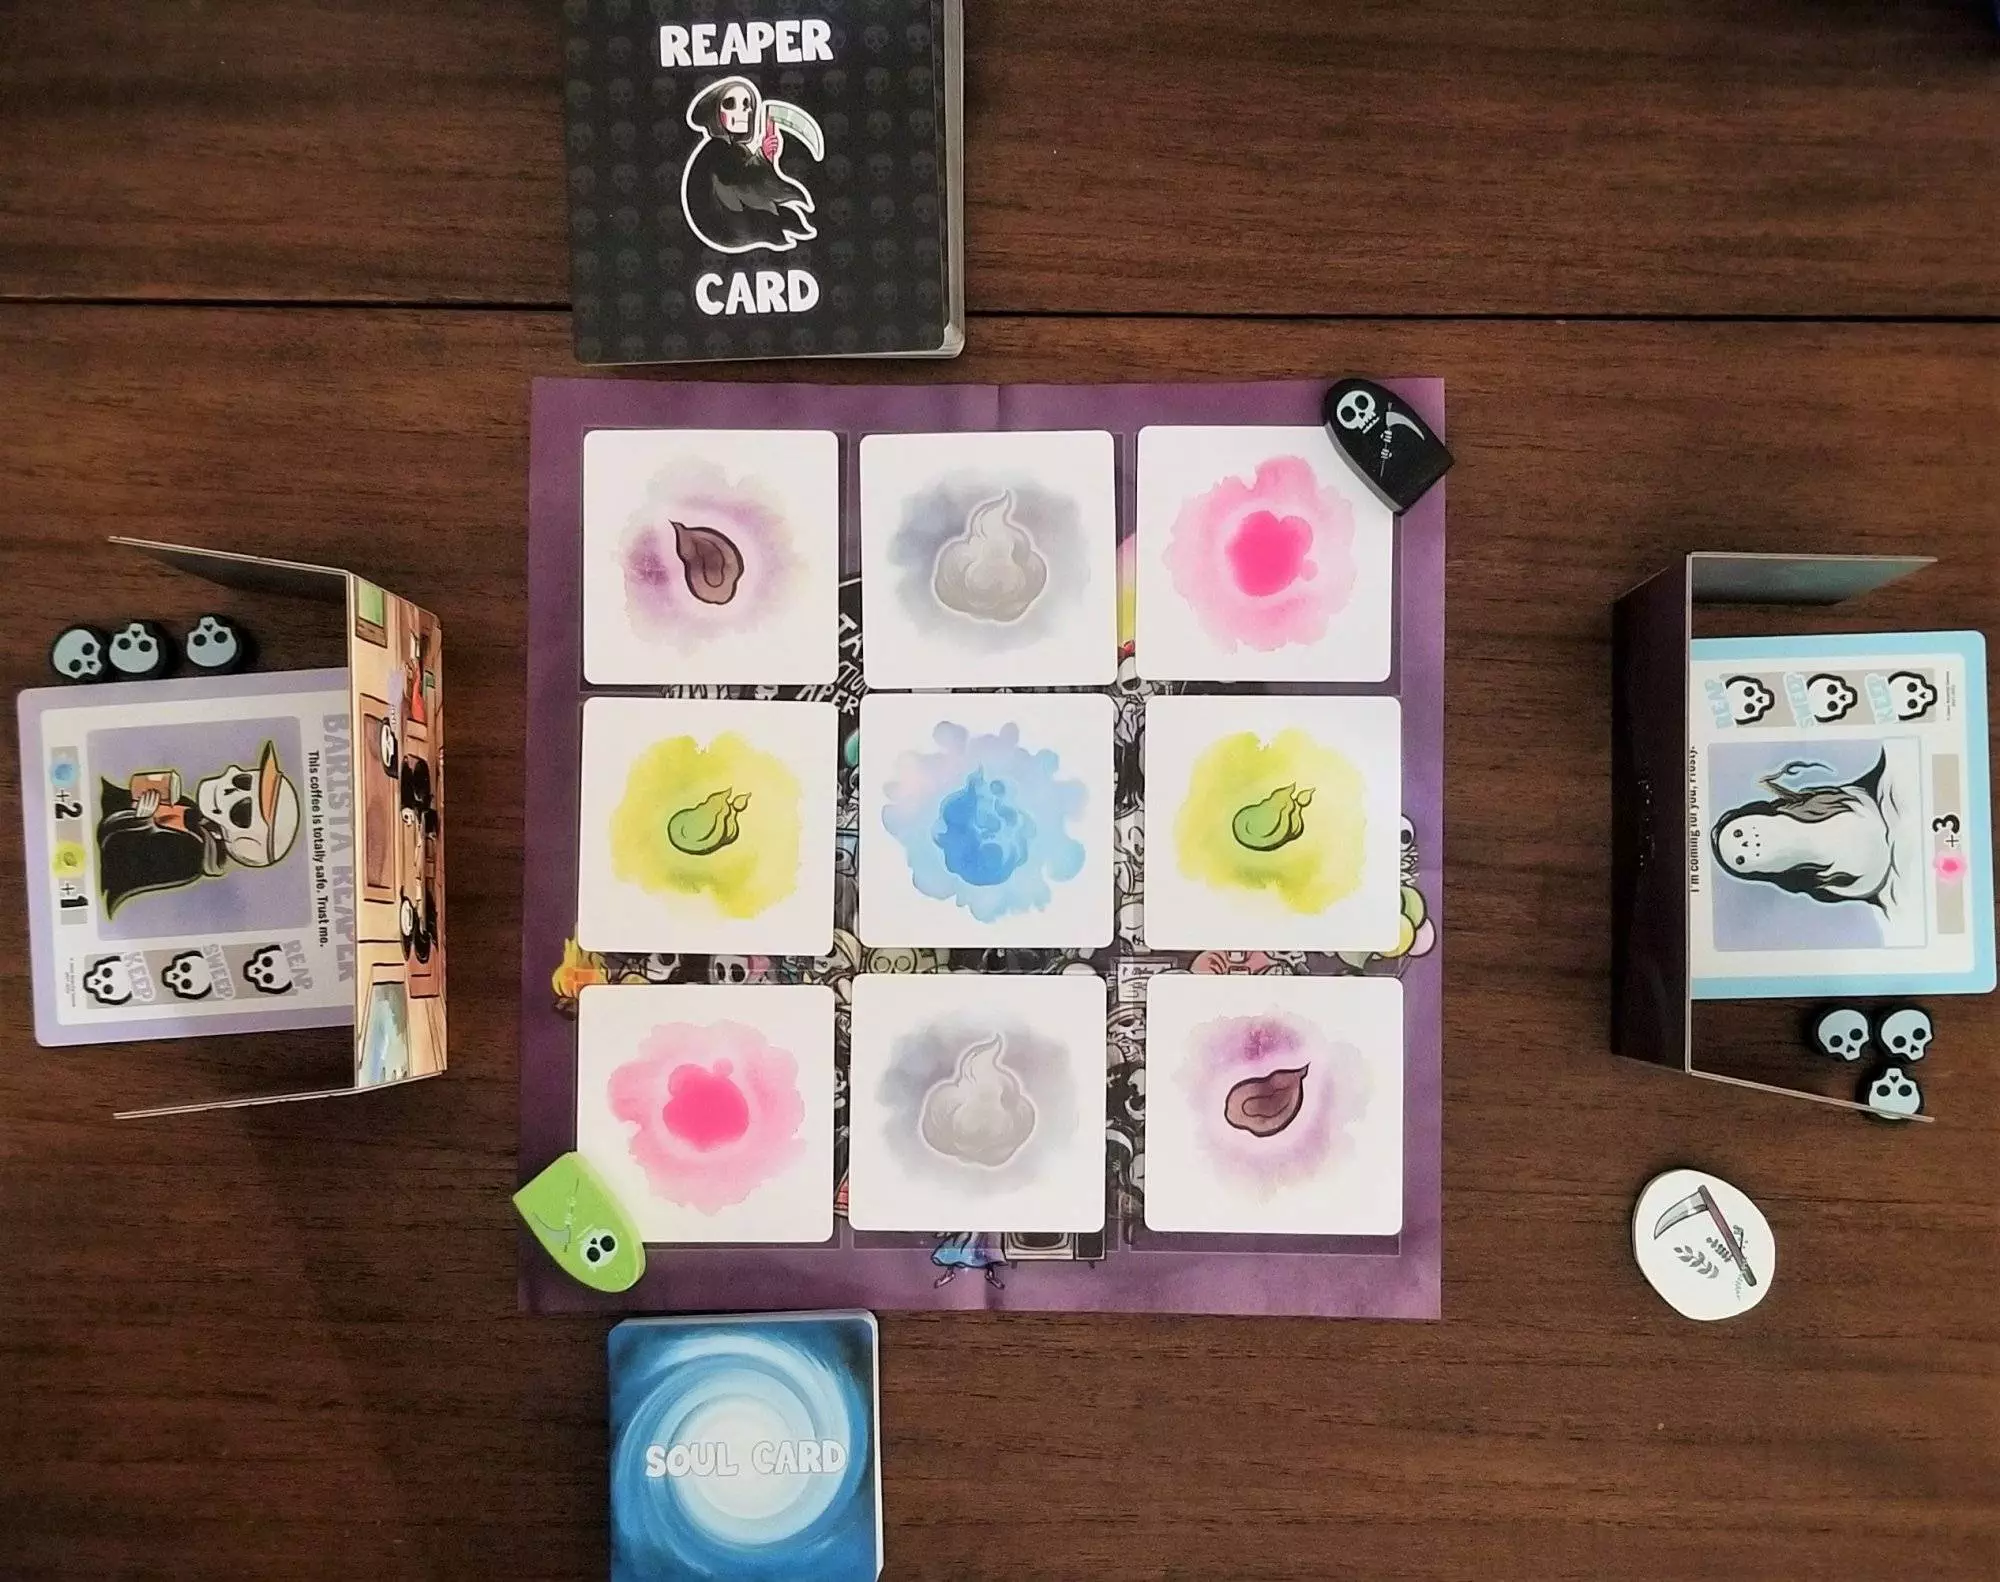 A 2-player set up of Reap from Jason Anarchy Games